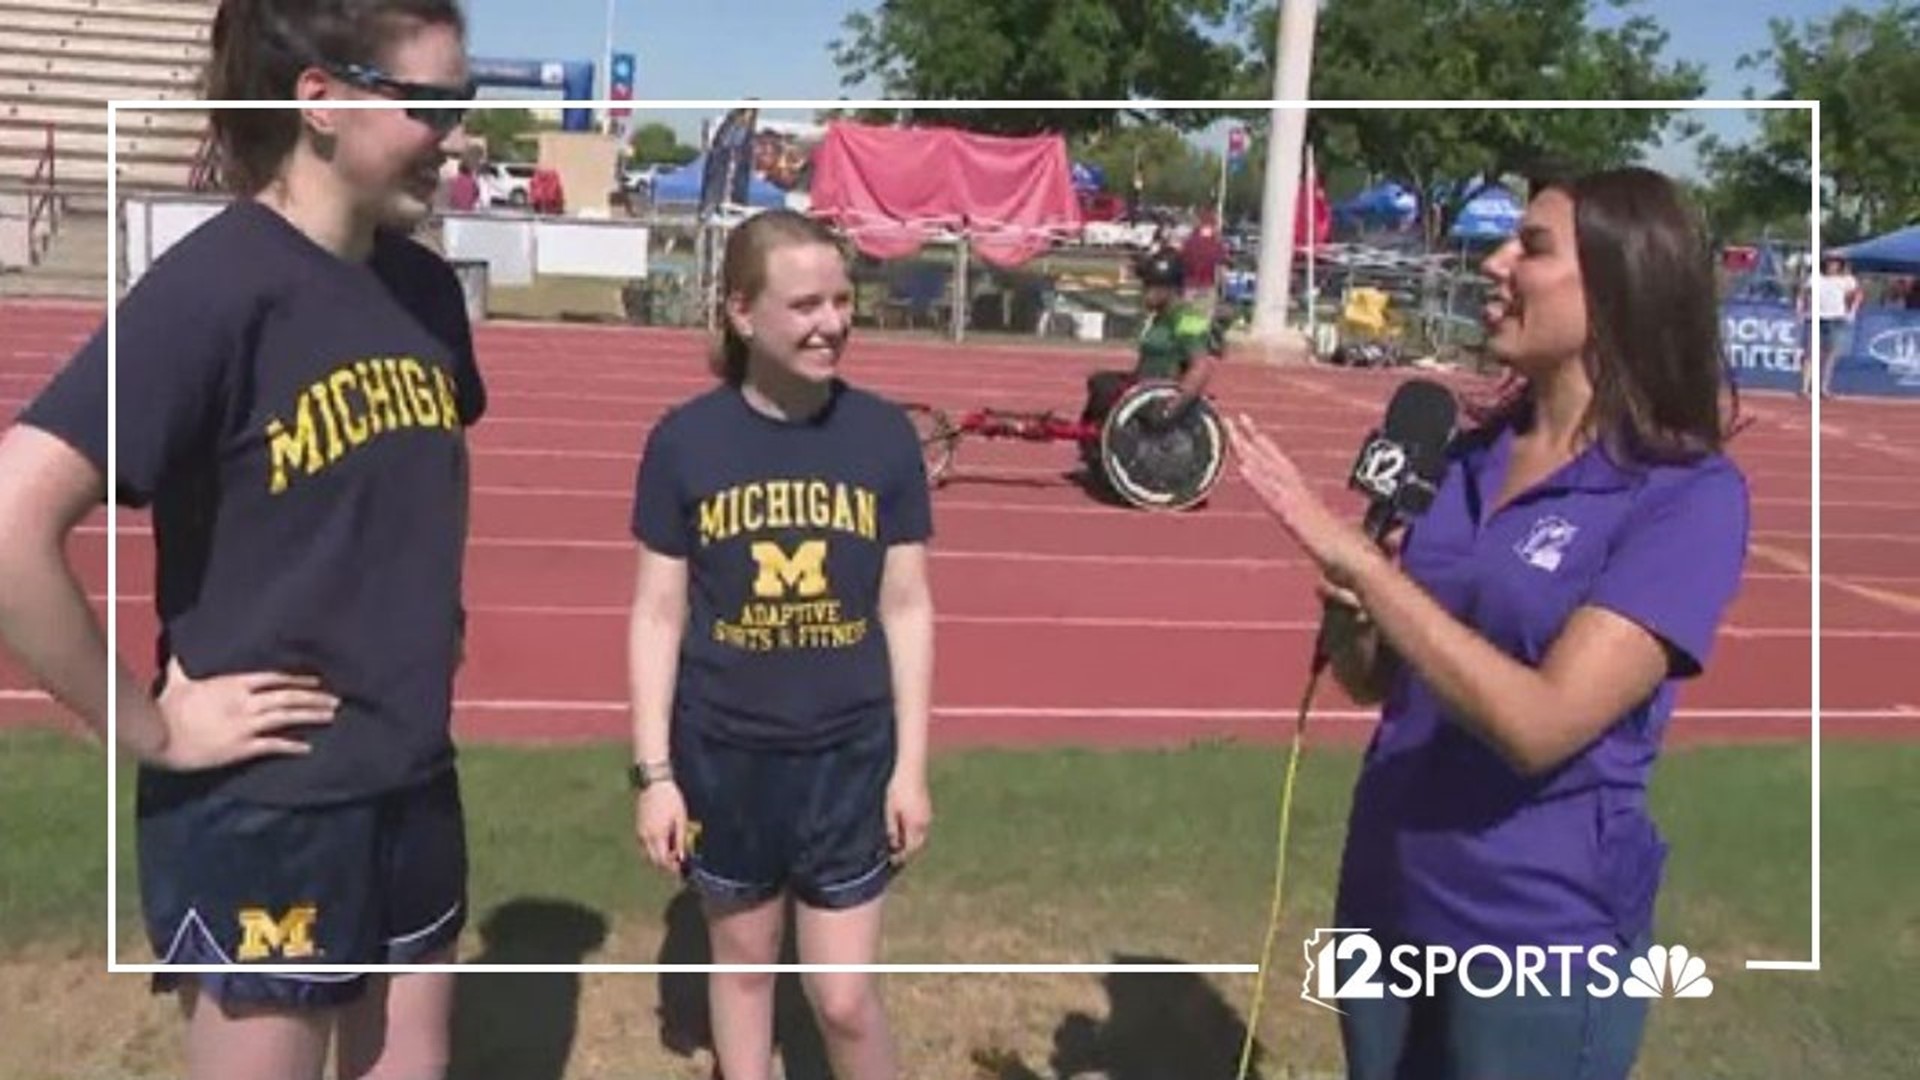 More than 340 athletes with disabilities from 12 different countries are making their way to Mesa, Arizona this week to compete in the 2022 Desert Challenge Games.